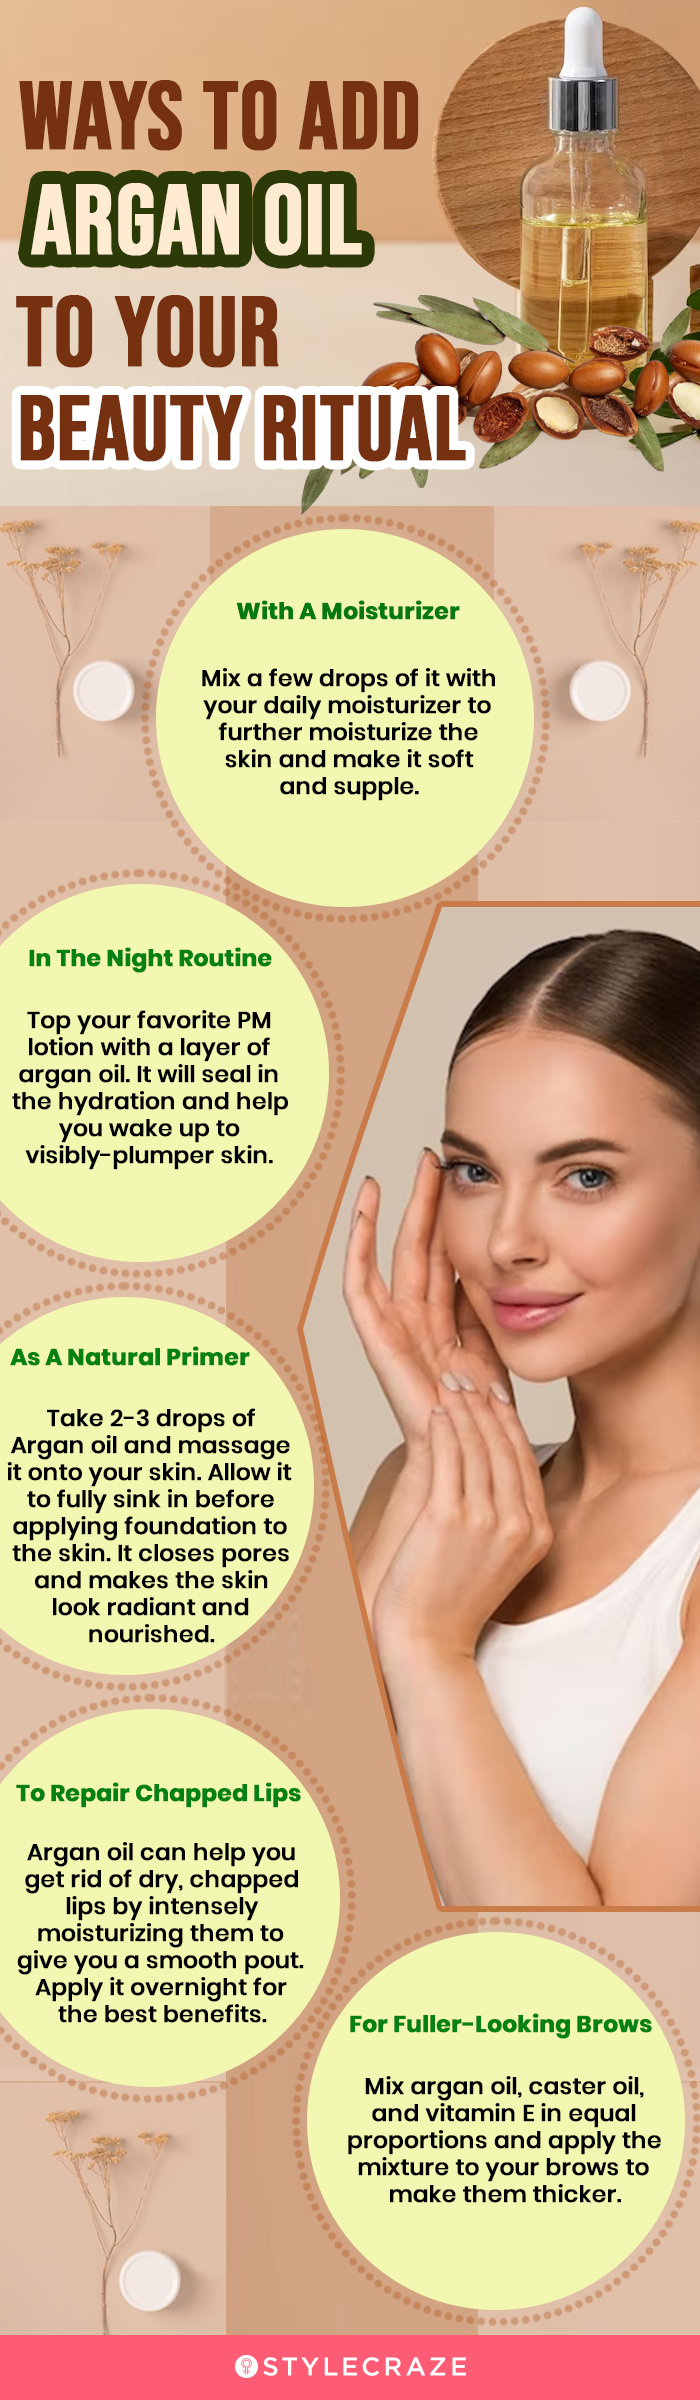 Ways To Add Argan Oil In Your Beauty Ritual (infographic)